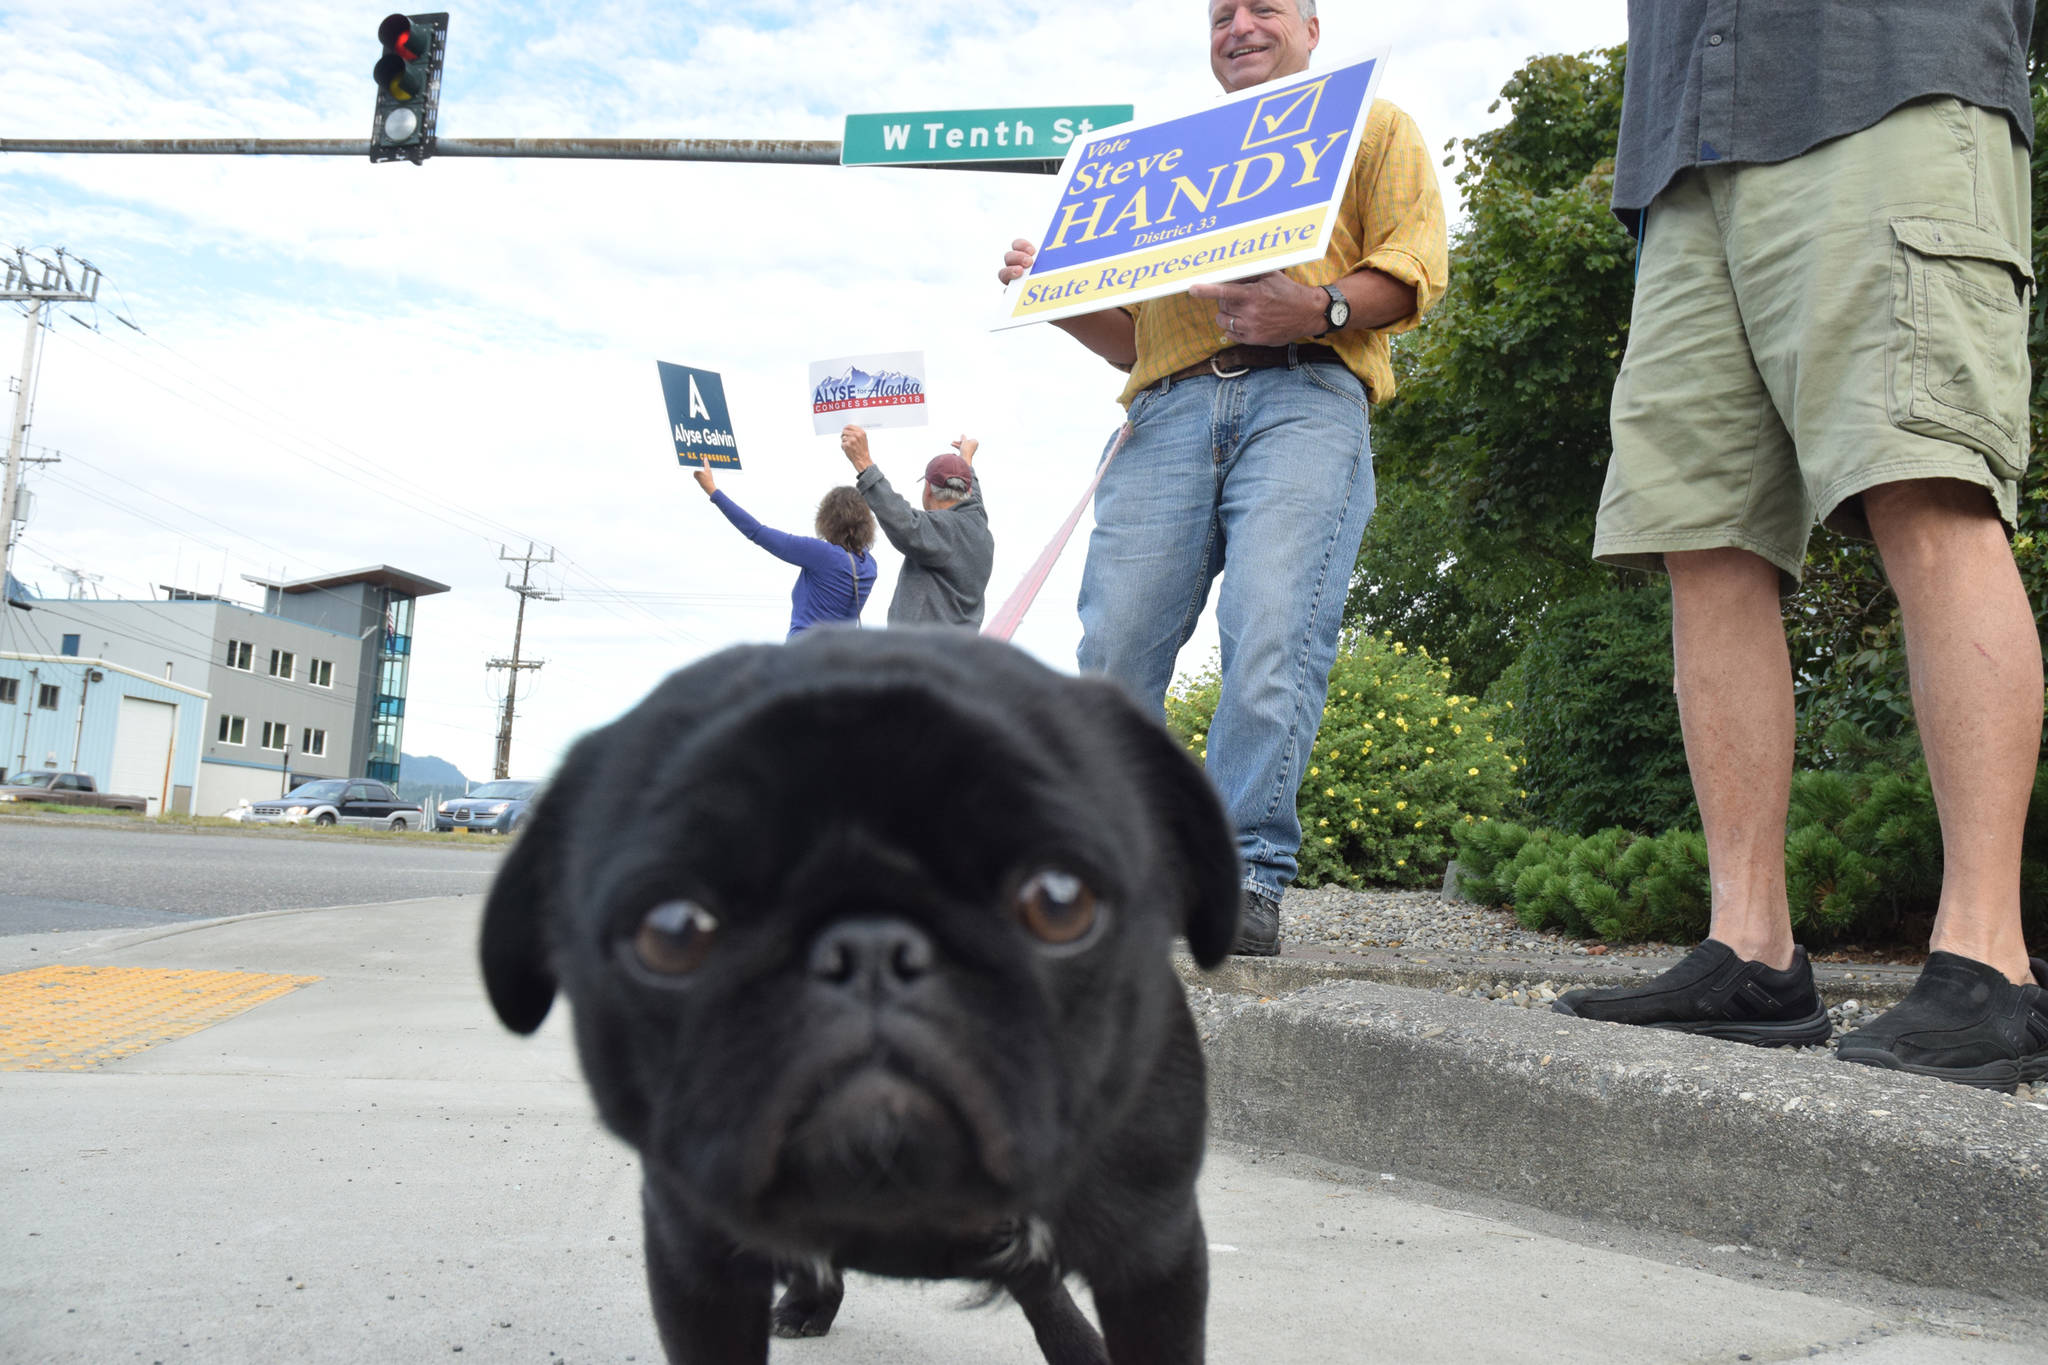 Steve Handy, Democratic candidate for House District 33, is accompanied by his pug, Panda, while waving signs at the Douglas Bridge intersection on Tuesday, Aug. 21, 2018. (James Brooks | Juneau Empire)